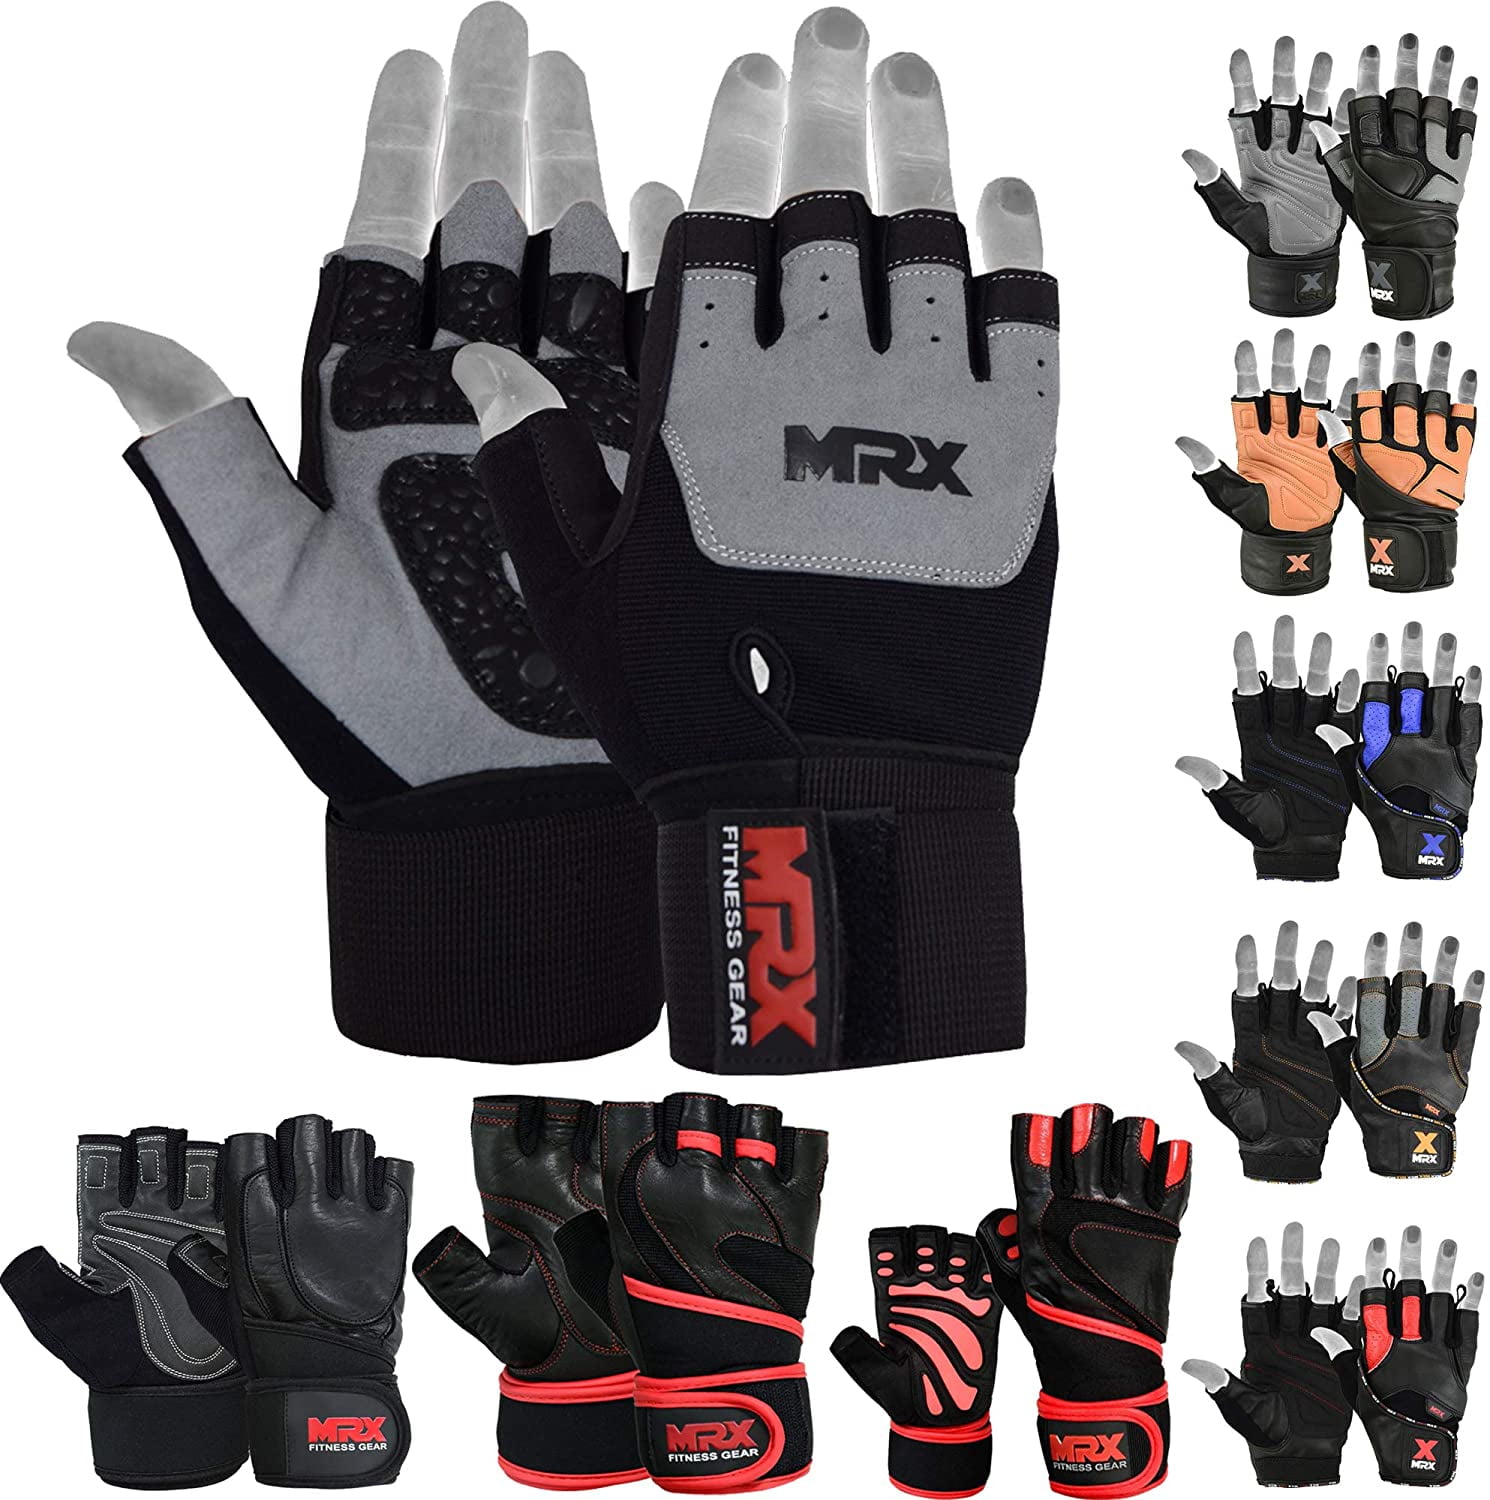 Weight Lifting Gloves with Long Wrist Wraps Gym Workout Fitness Training Glove 